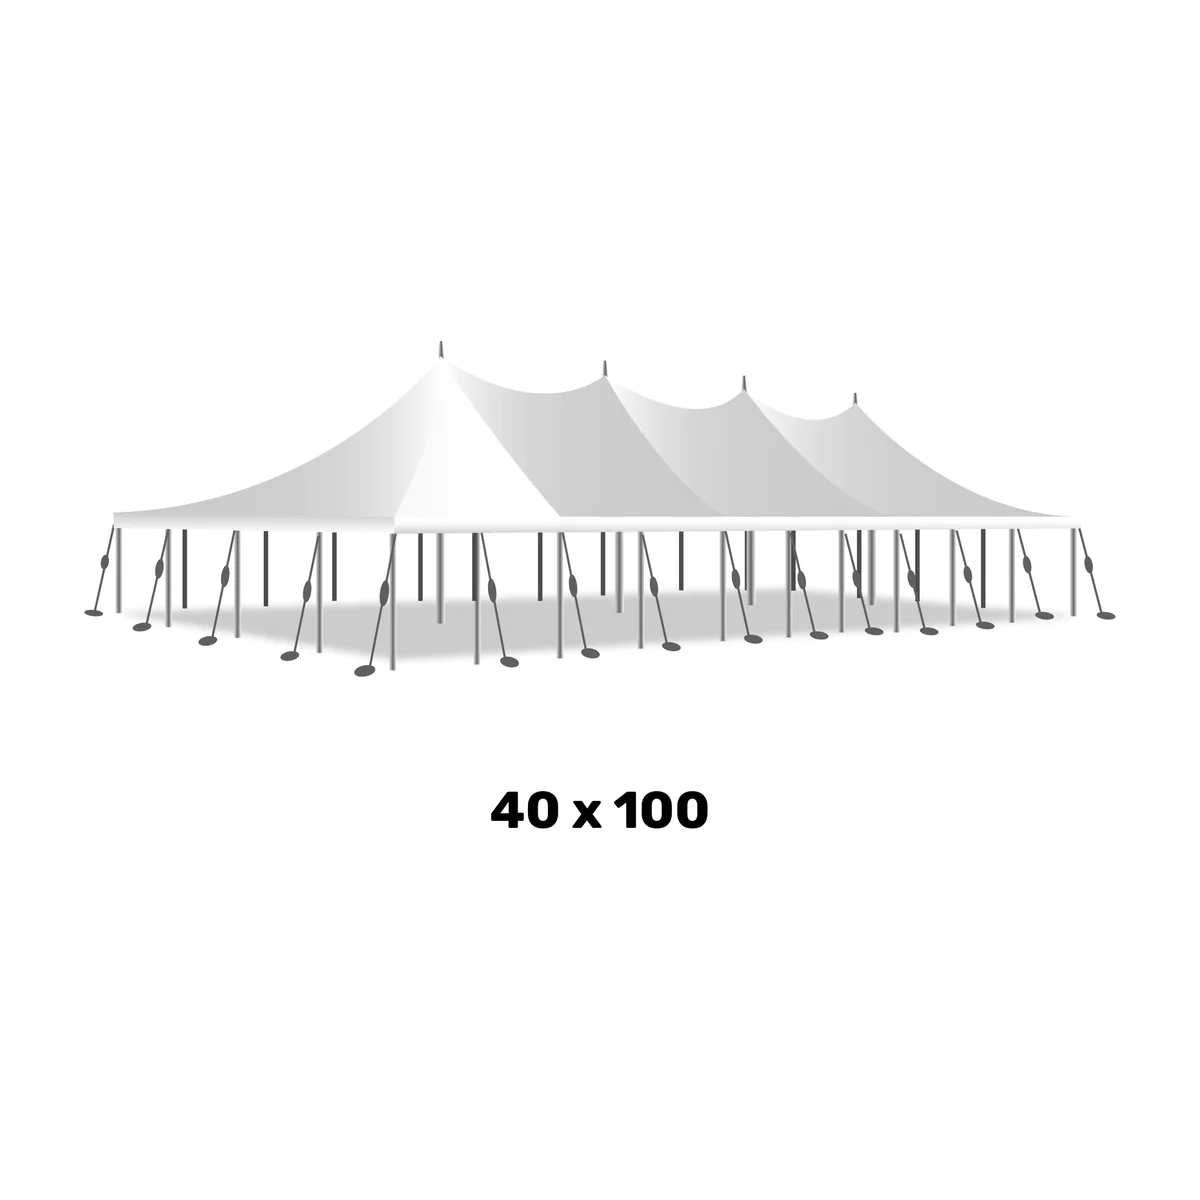 a 40 foot by 100 foot white marquee high peak pole tent